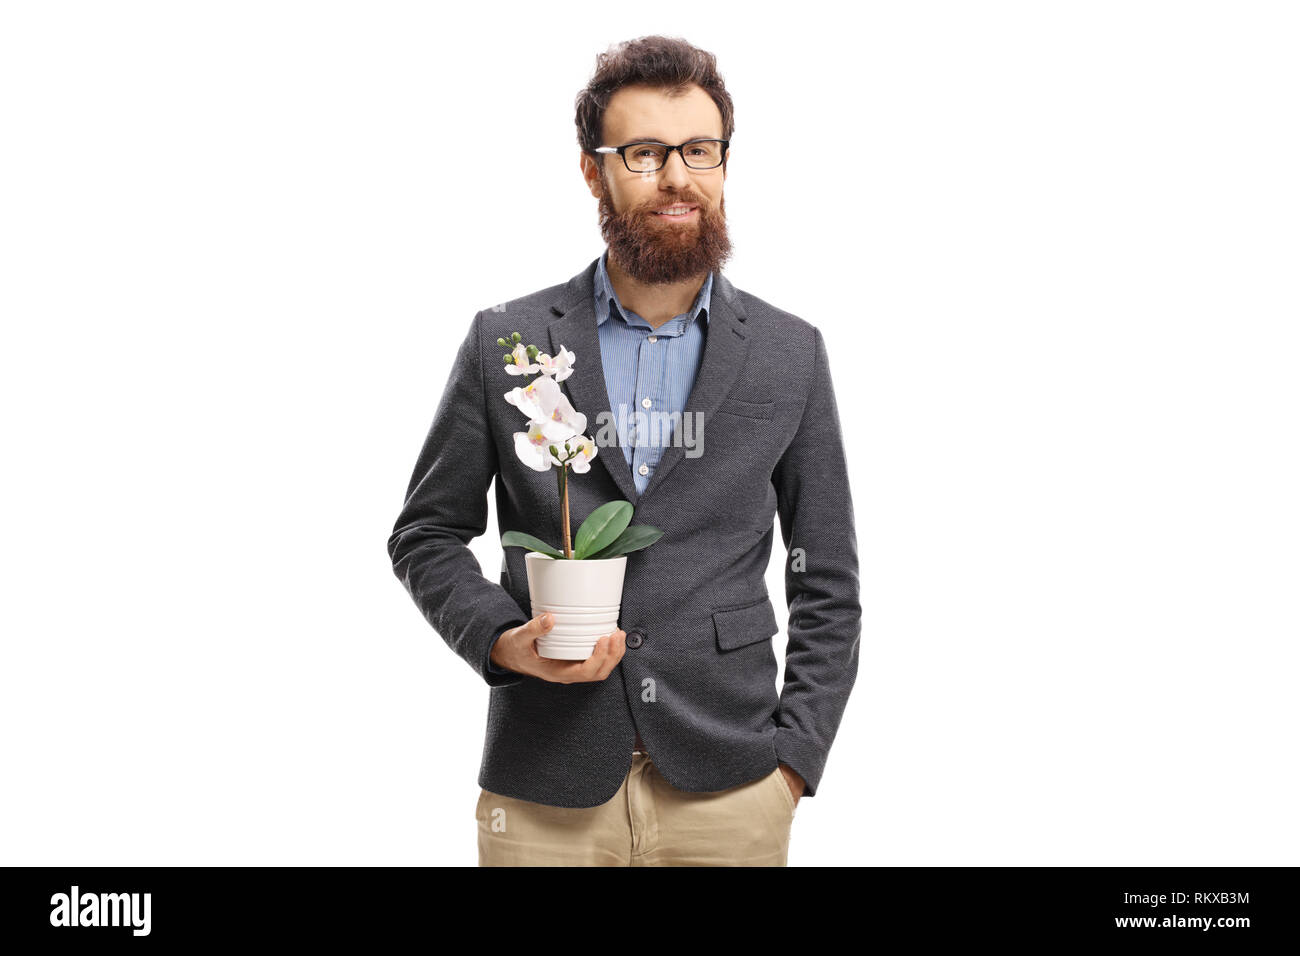 Smiling young man with a beard holding a mini white orchid isolated on white background Stock Photo